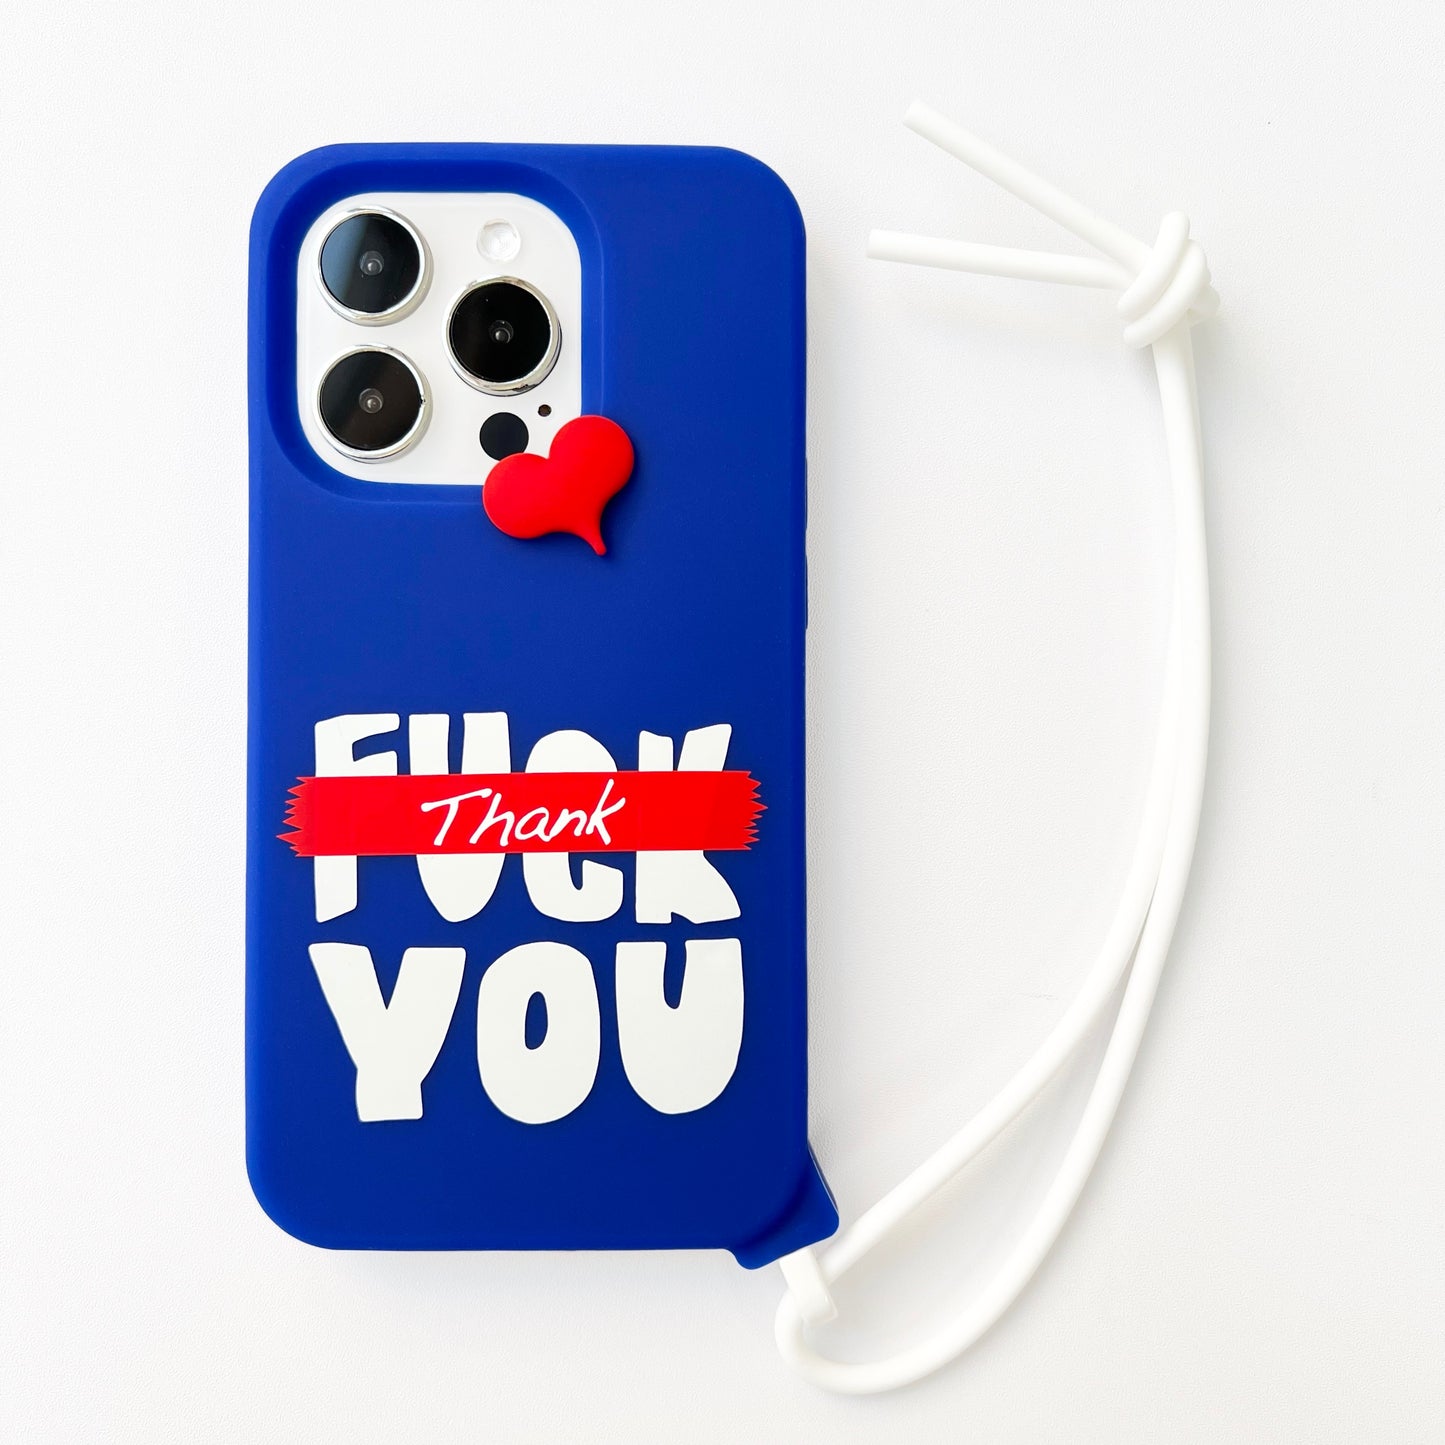 iPhone 14 Pro Case with Mini Heart (THANK You)